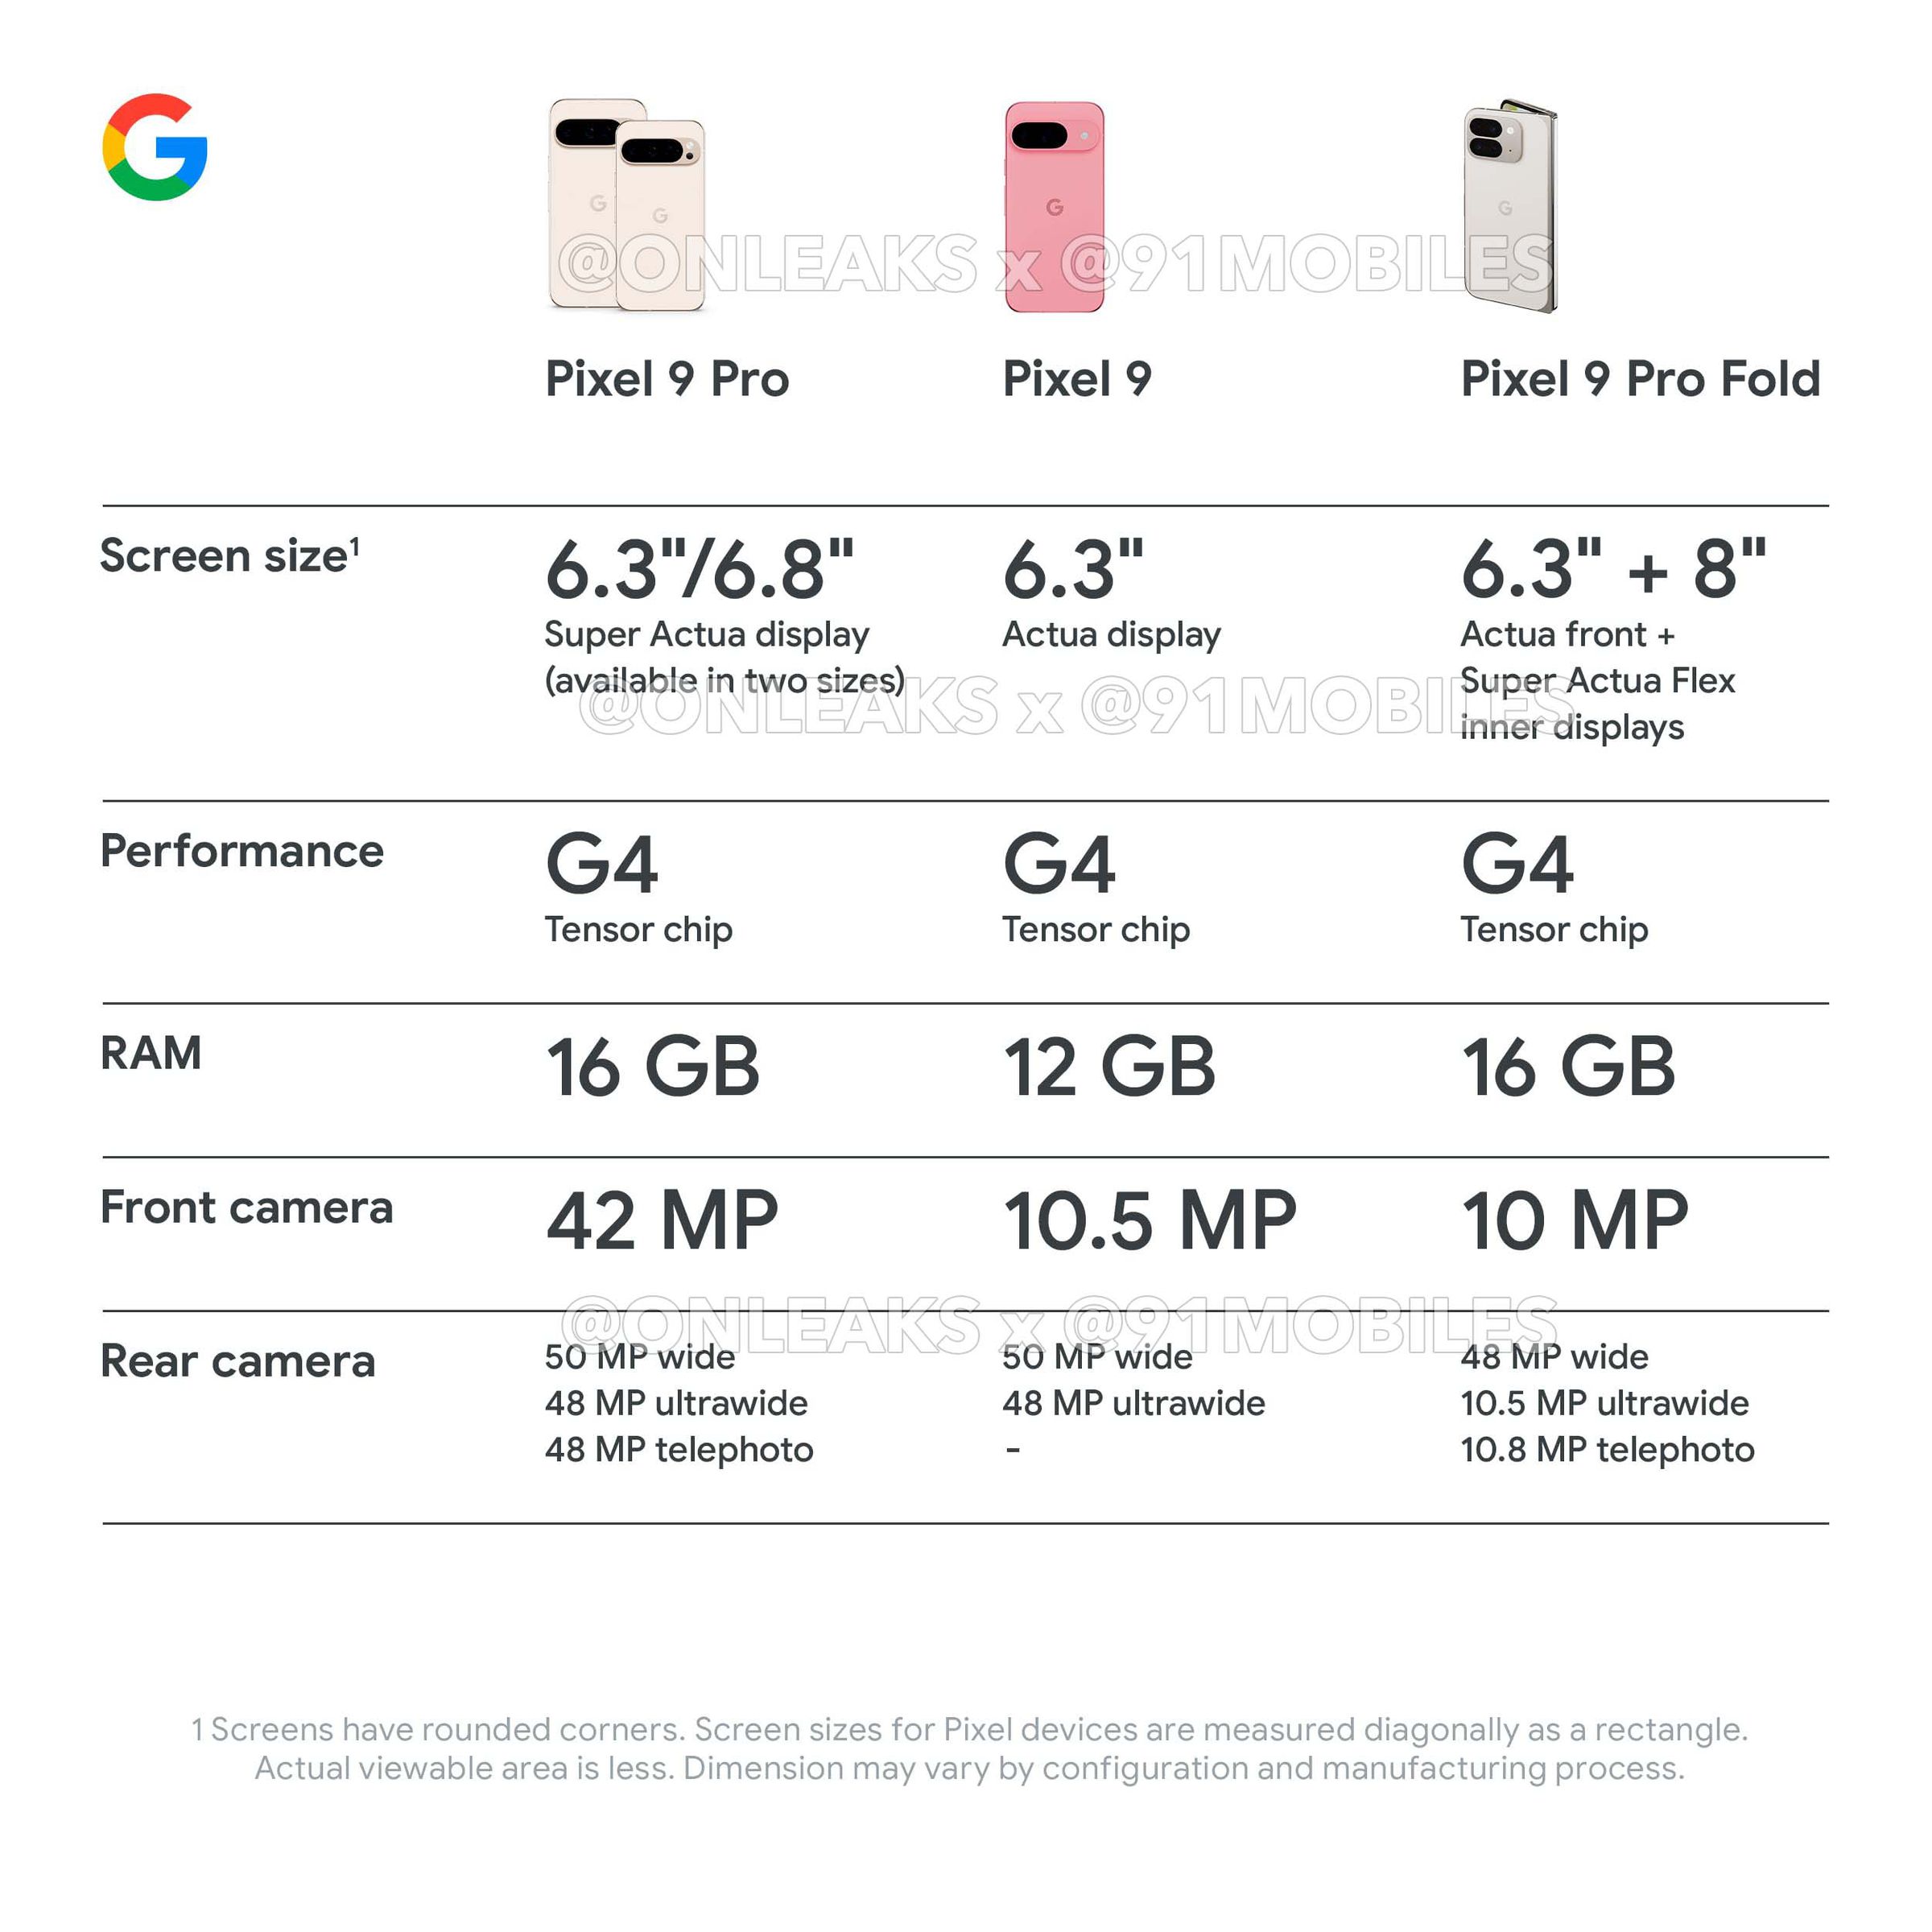 A leaked specs sheet that shows the purported details of the Pixel 9, Pixel 9 Pro, and Pixel 9 Pro Fold